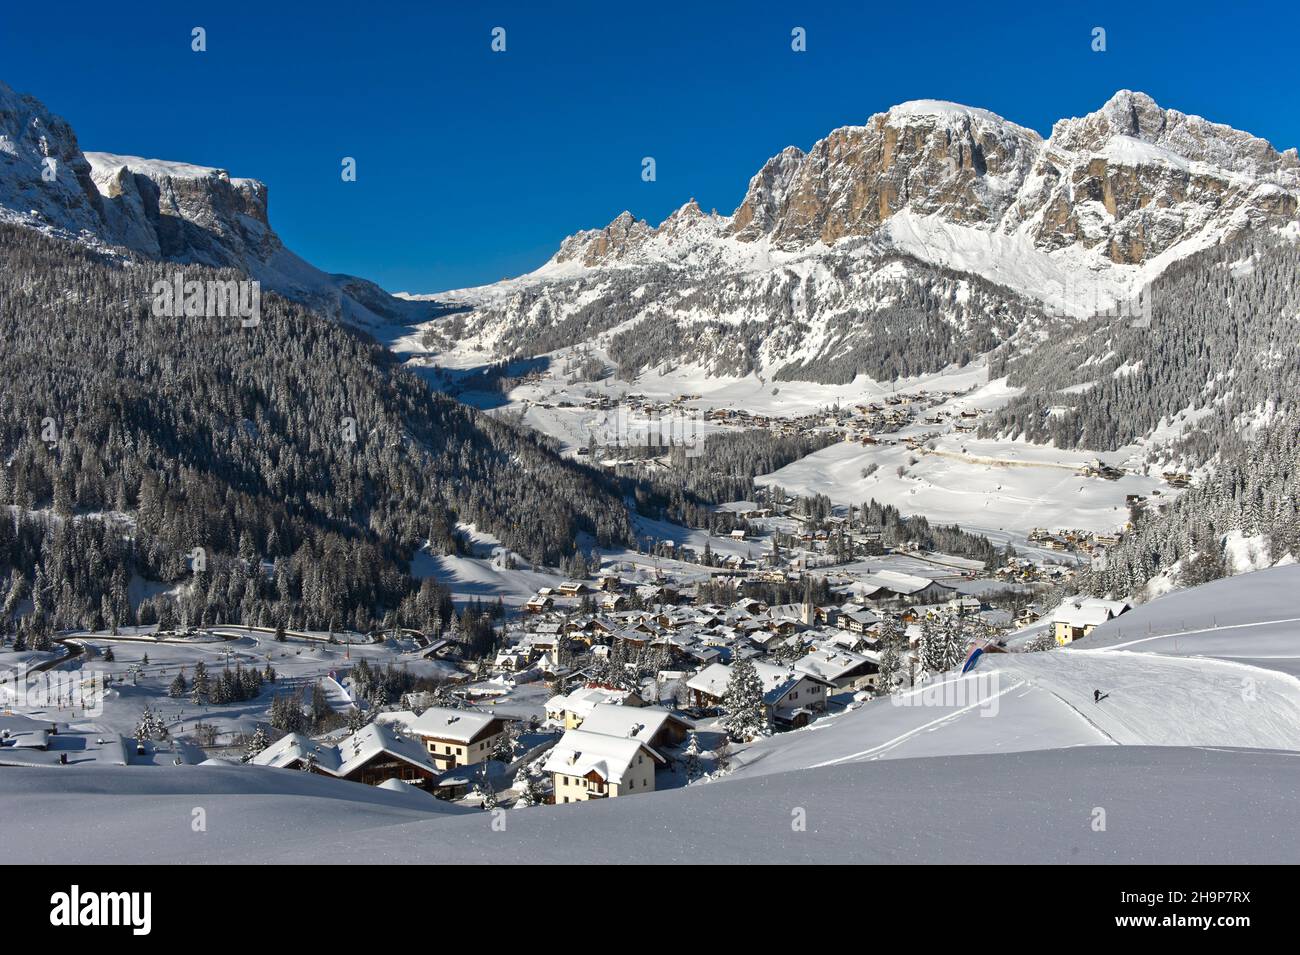 Mountain village of La Villa in front of the snow-covered Dolomite peaks in the Alta Badia ski area, Dolomites, South Tyrol, Italy Stock Photo